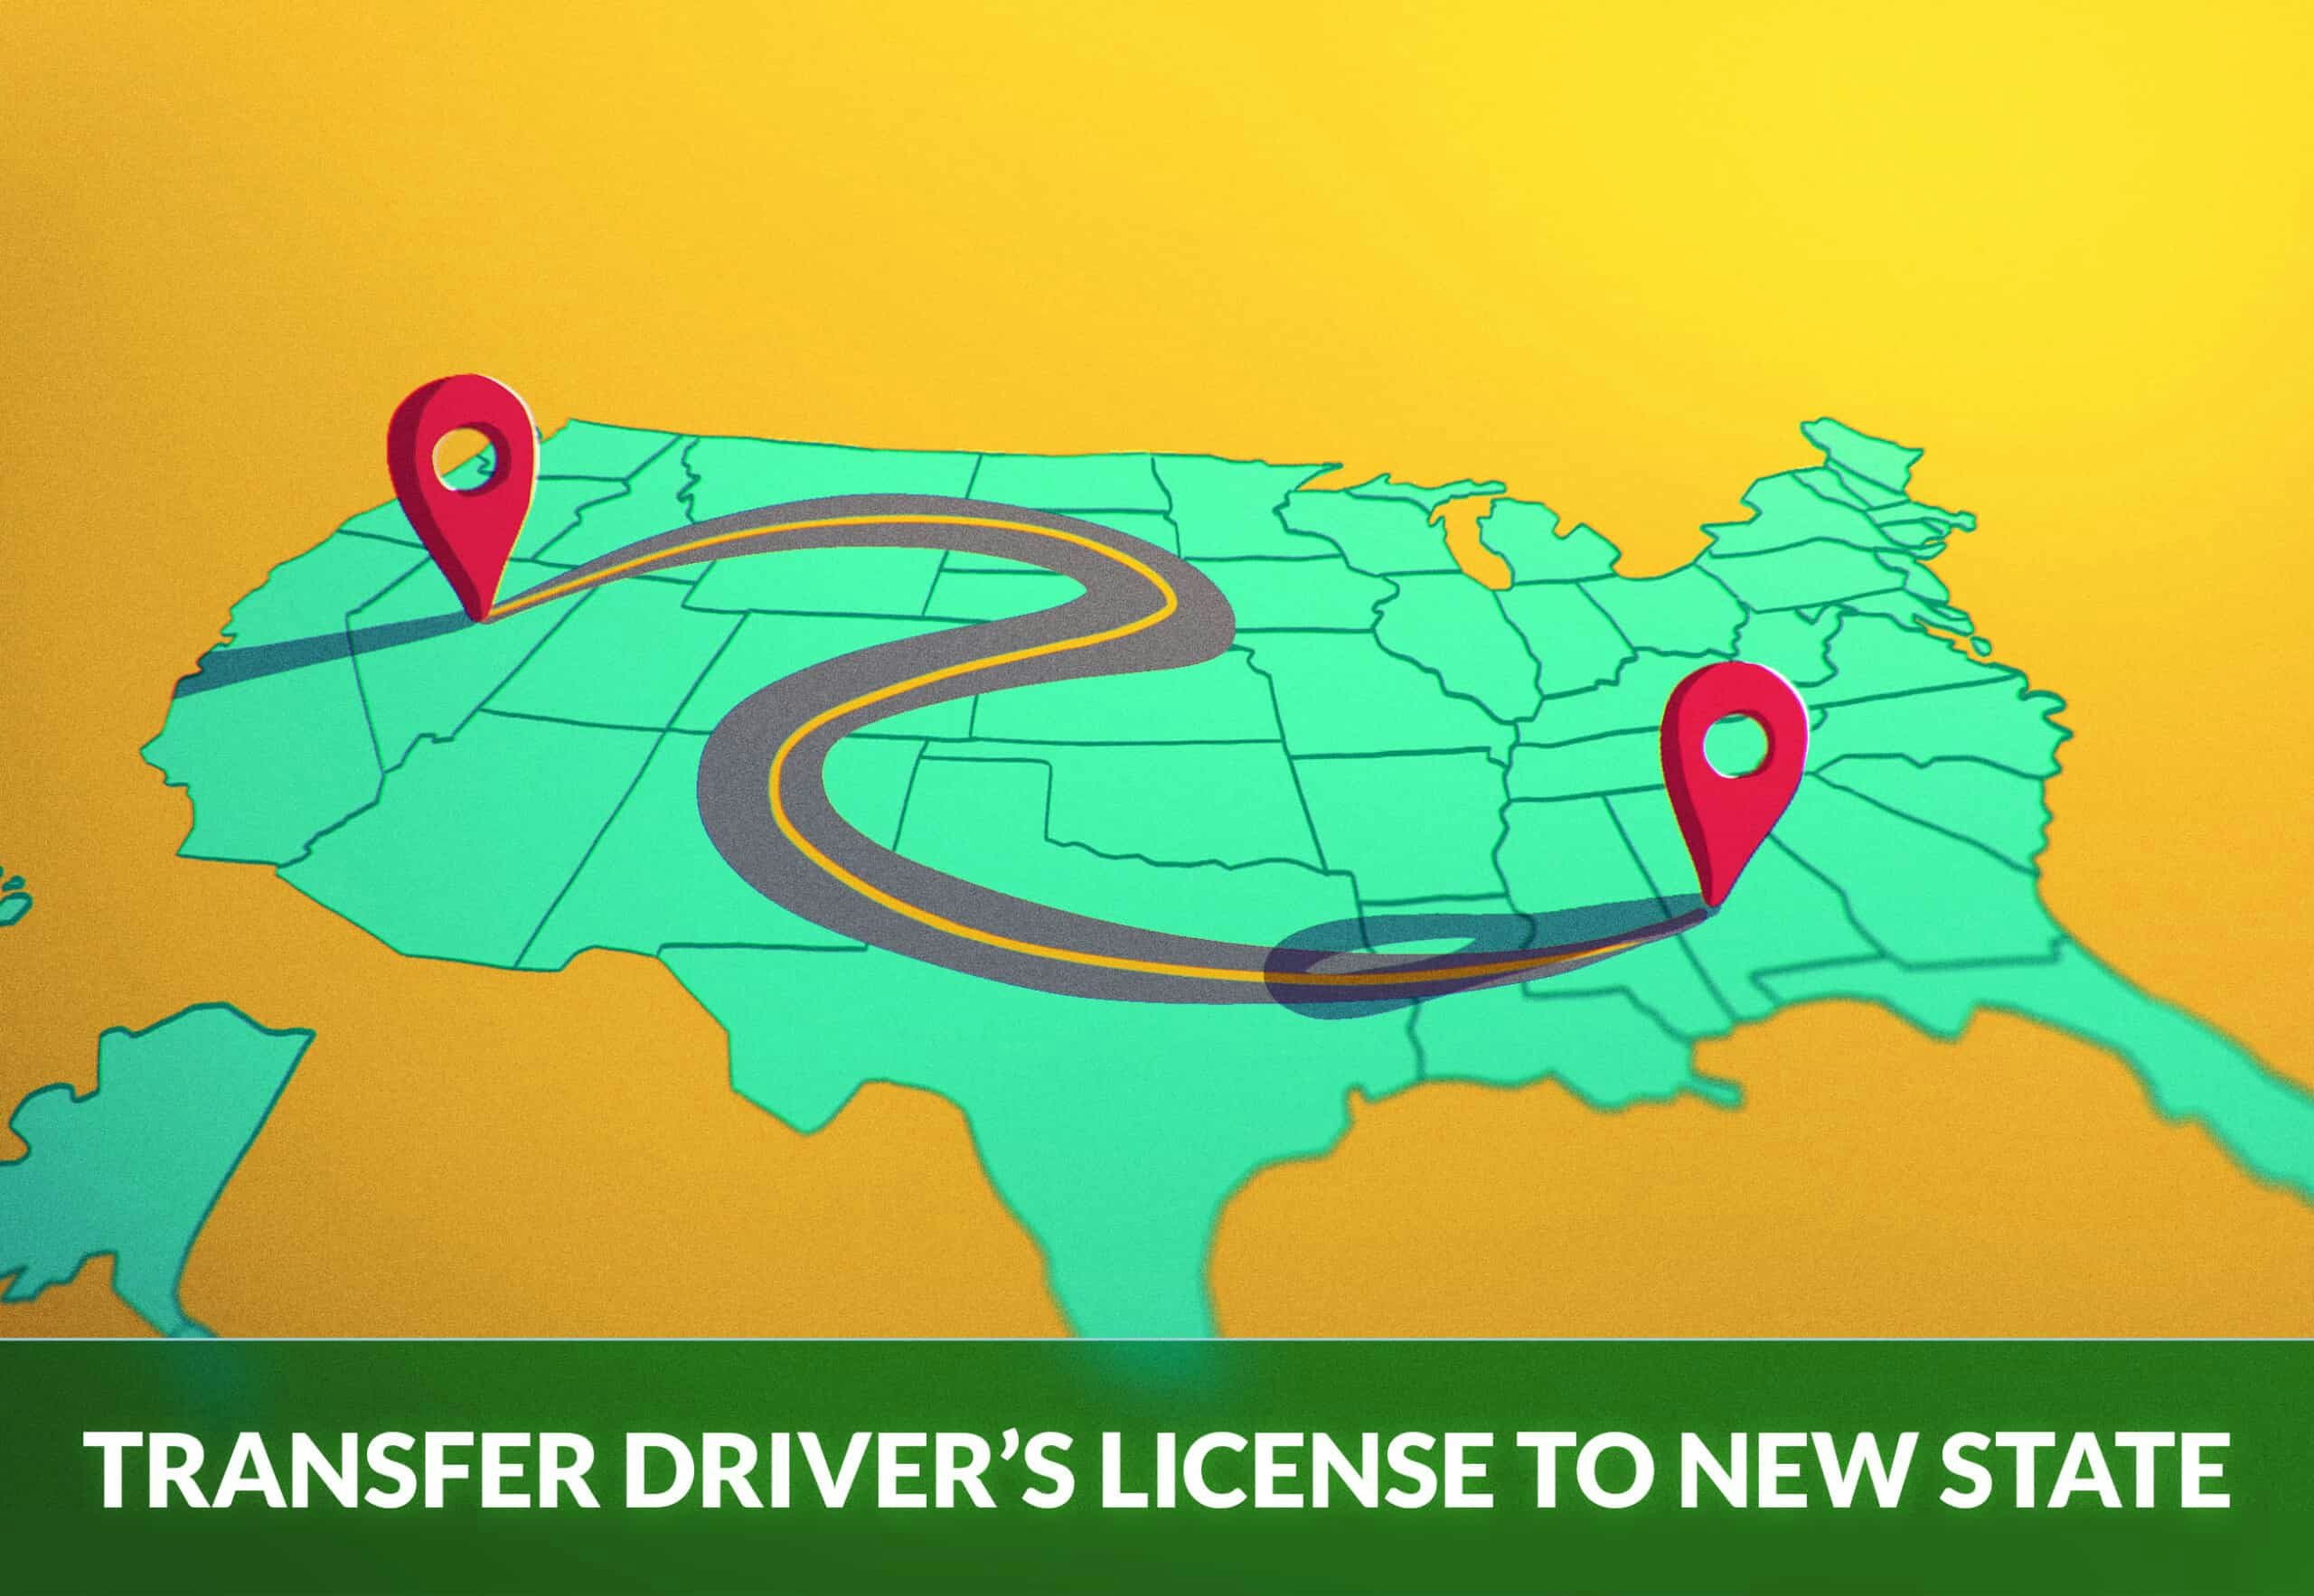 Solved Driver License Online Test The local driver's license